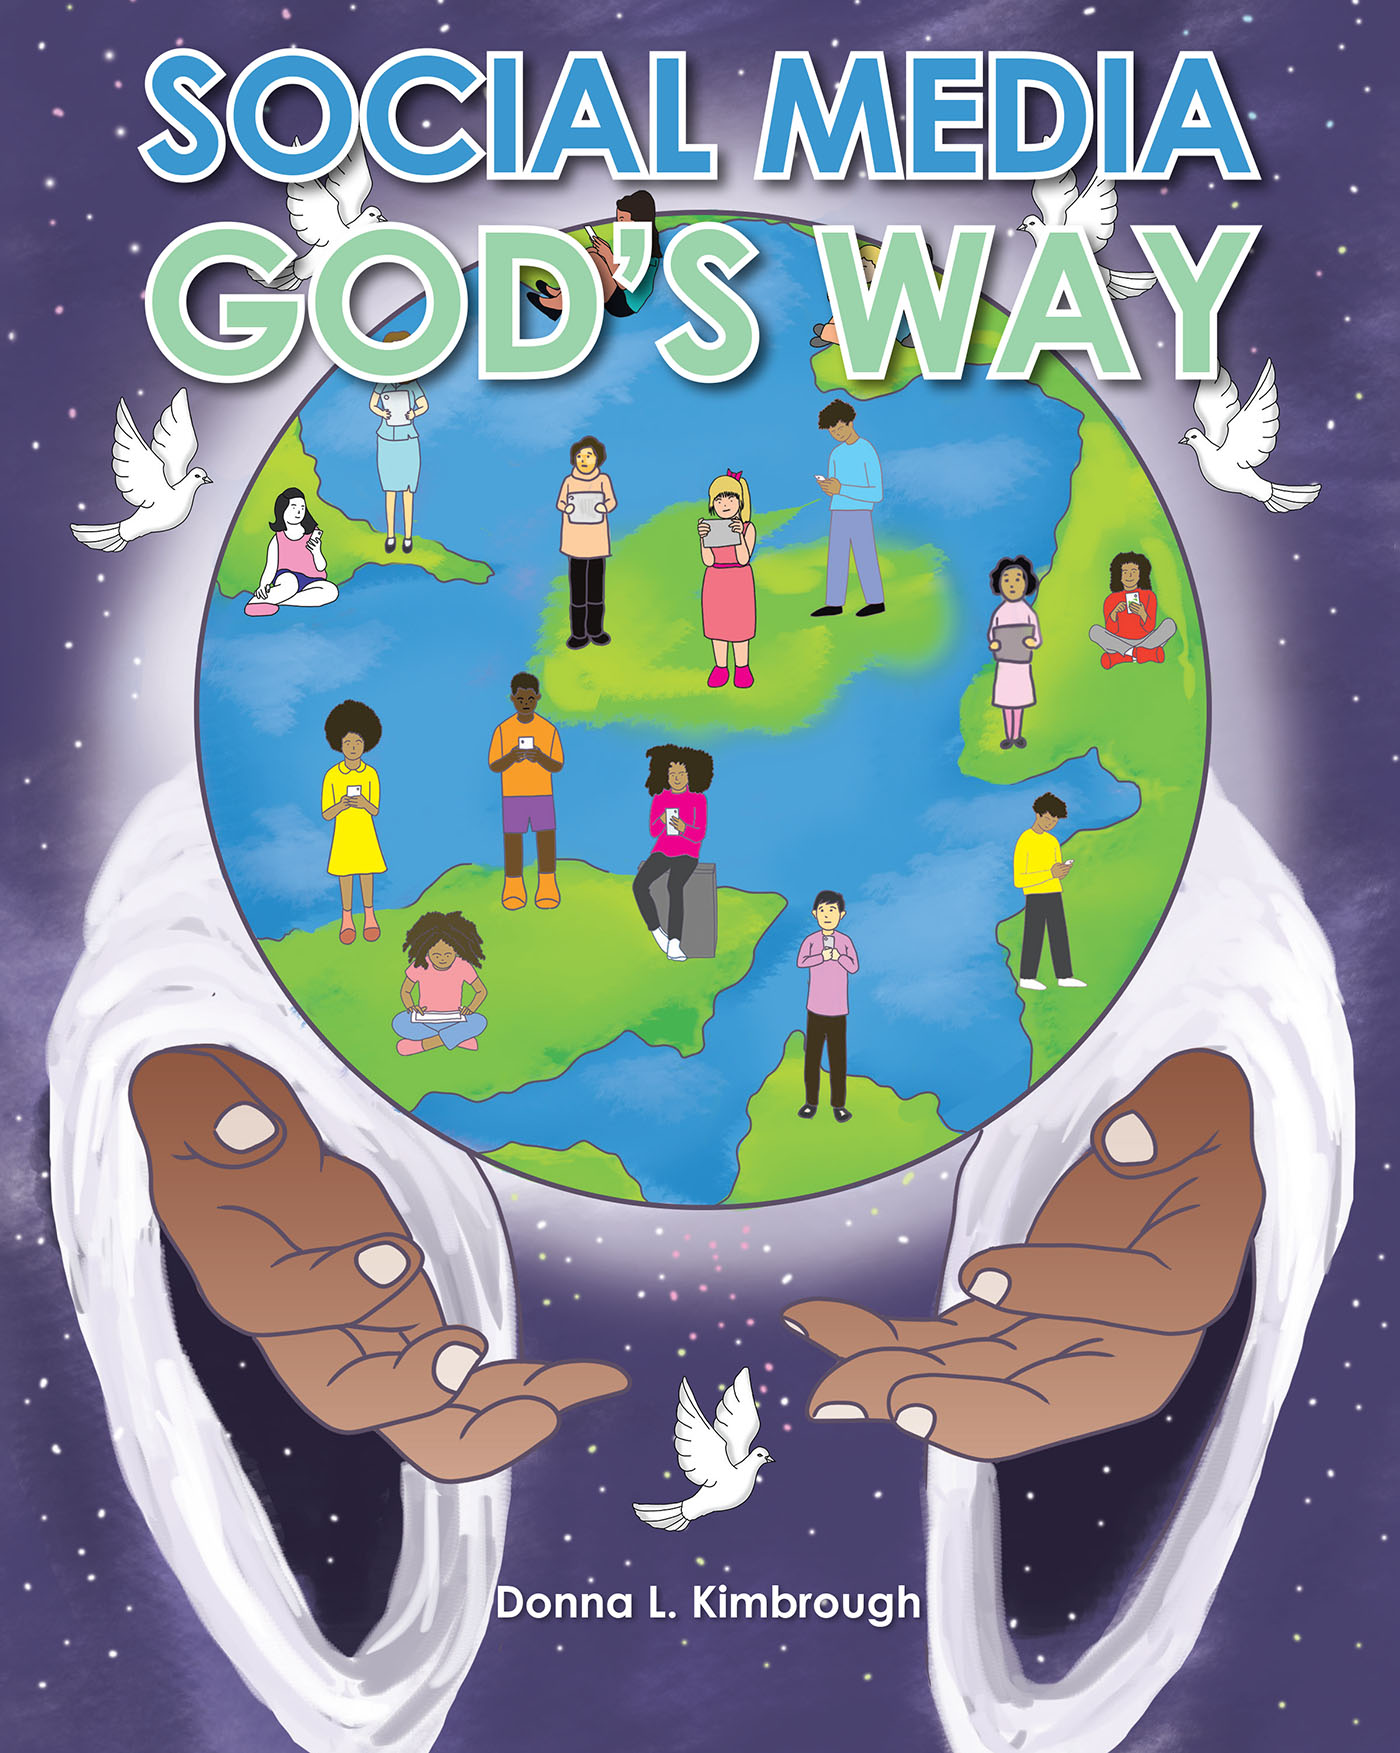 Donna L. Kimbrough’s Newly Released "Social Media God’s Way" is an Informative Lesson on the Ins and Outs of Social Media